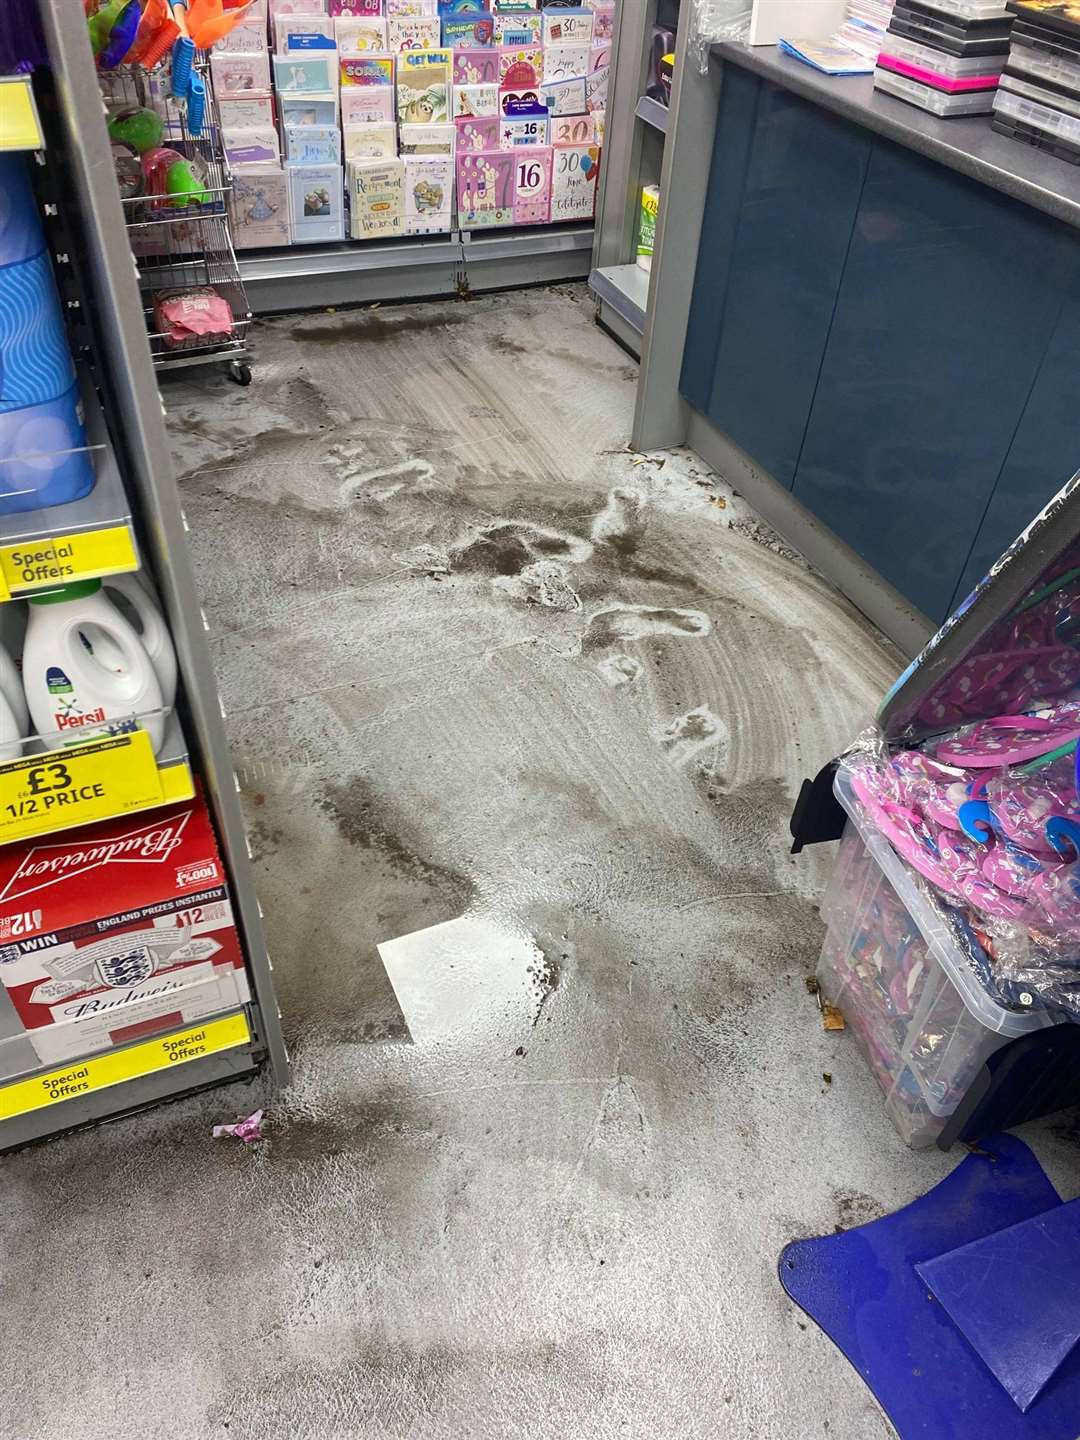 Terry and Kent newsagents was hit by the flooding. Photo: Terry and Kent